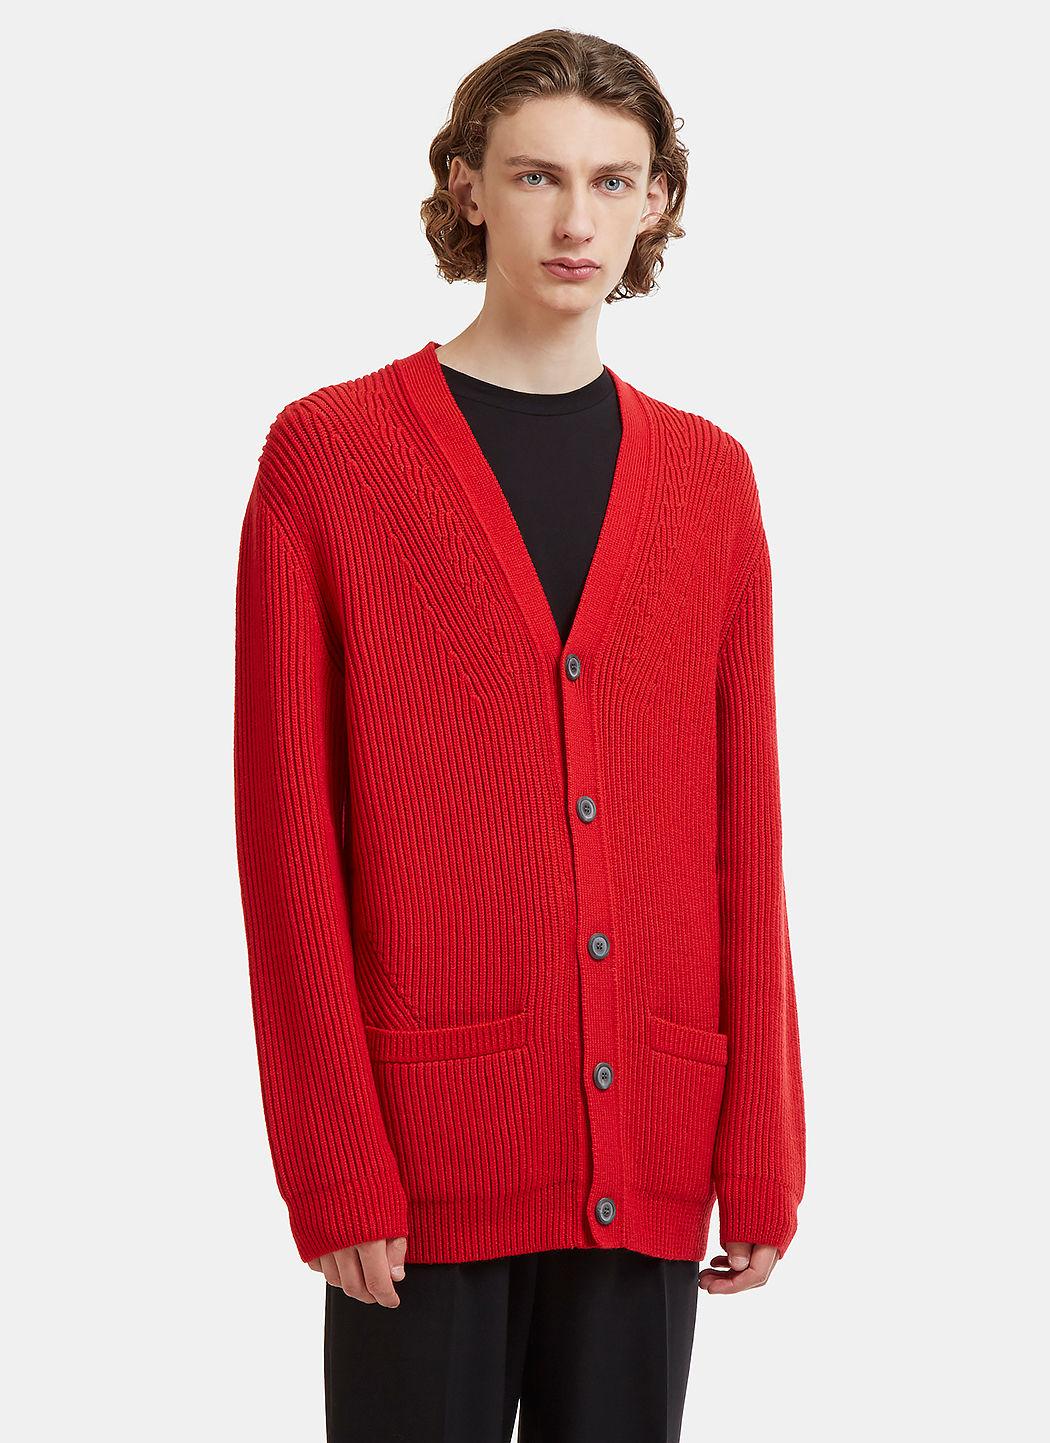 Lanvin Oversized Ribbed Knit Cardigan In Red | ModeSens